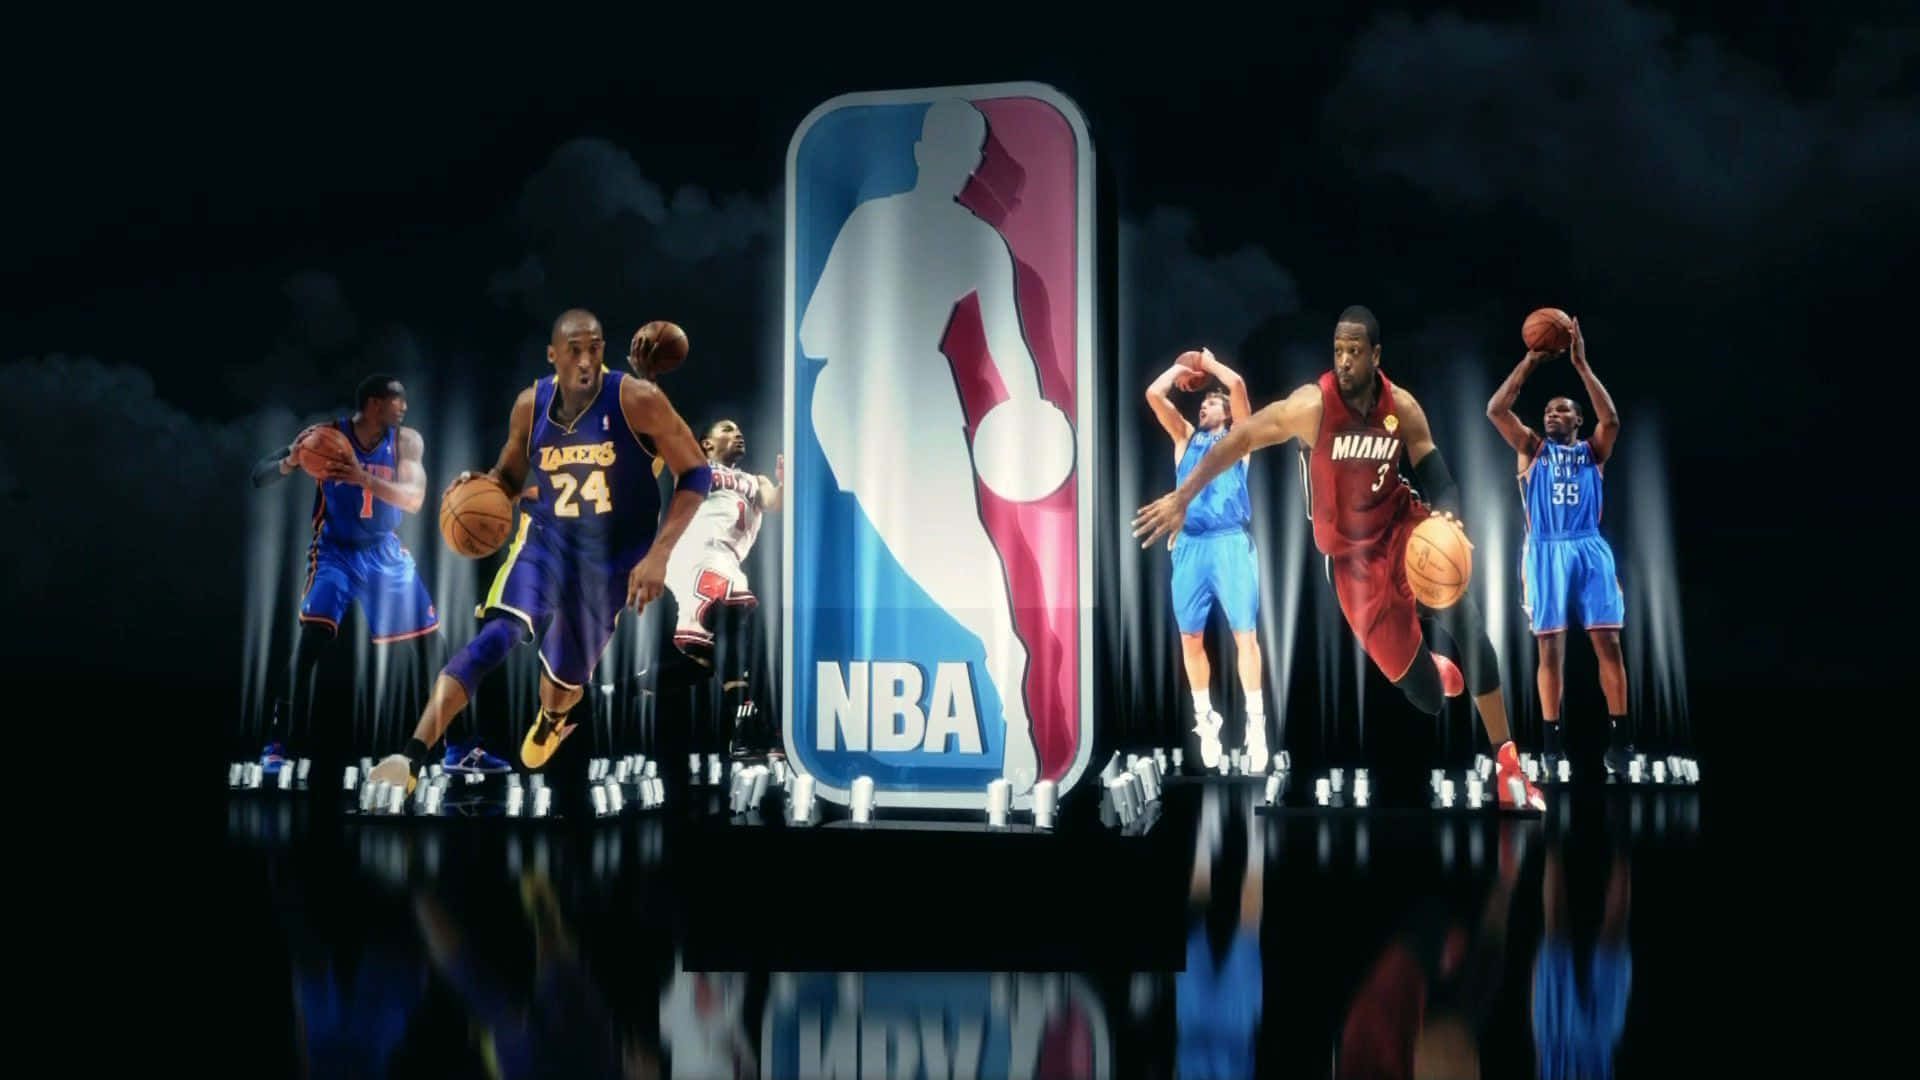 Nba Players Are Standing In Front Of A Dark Background